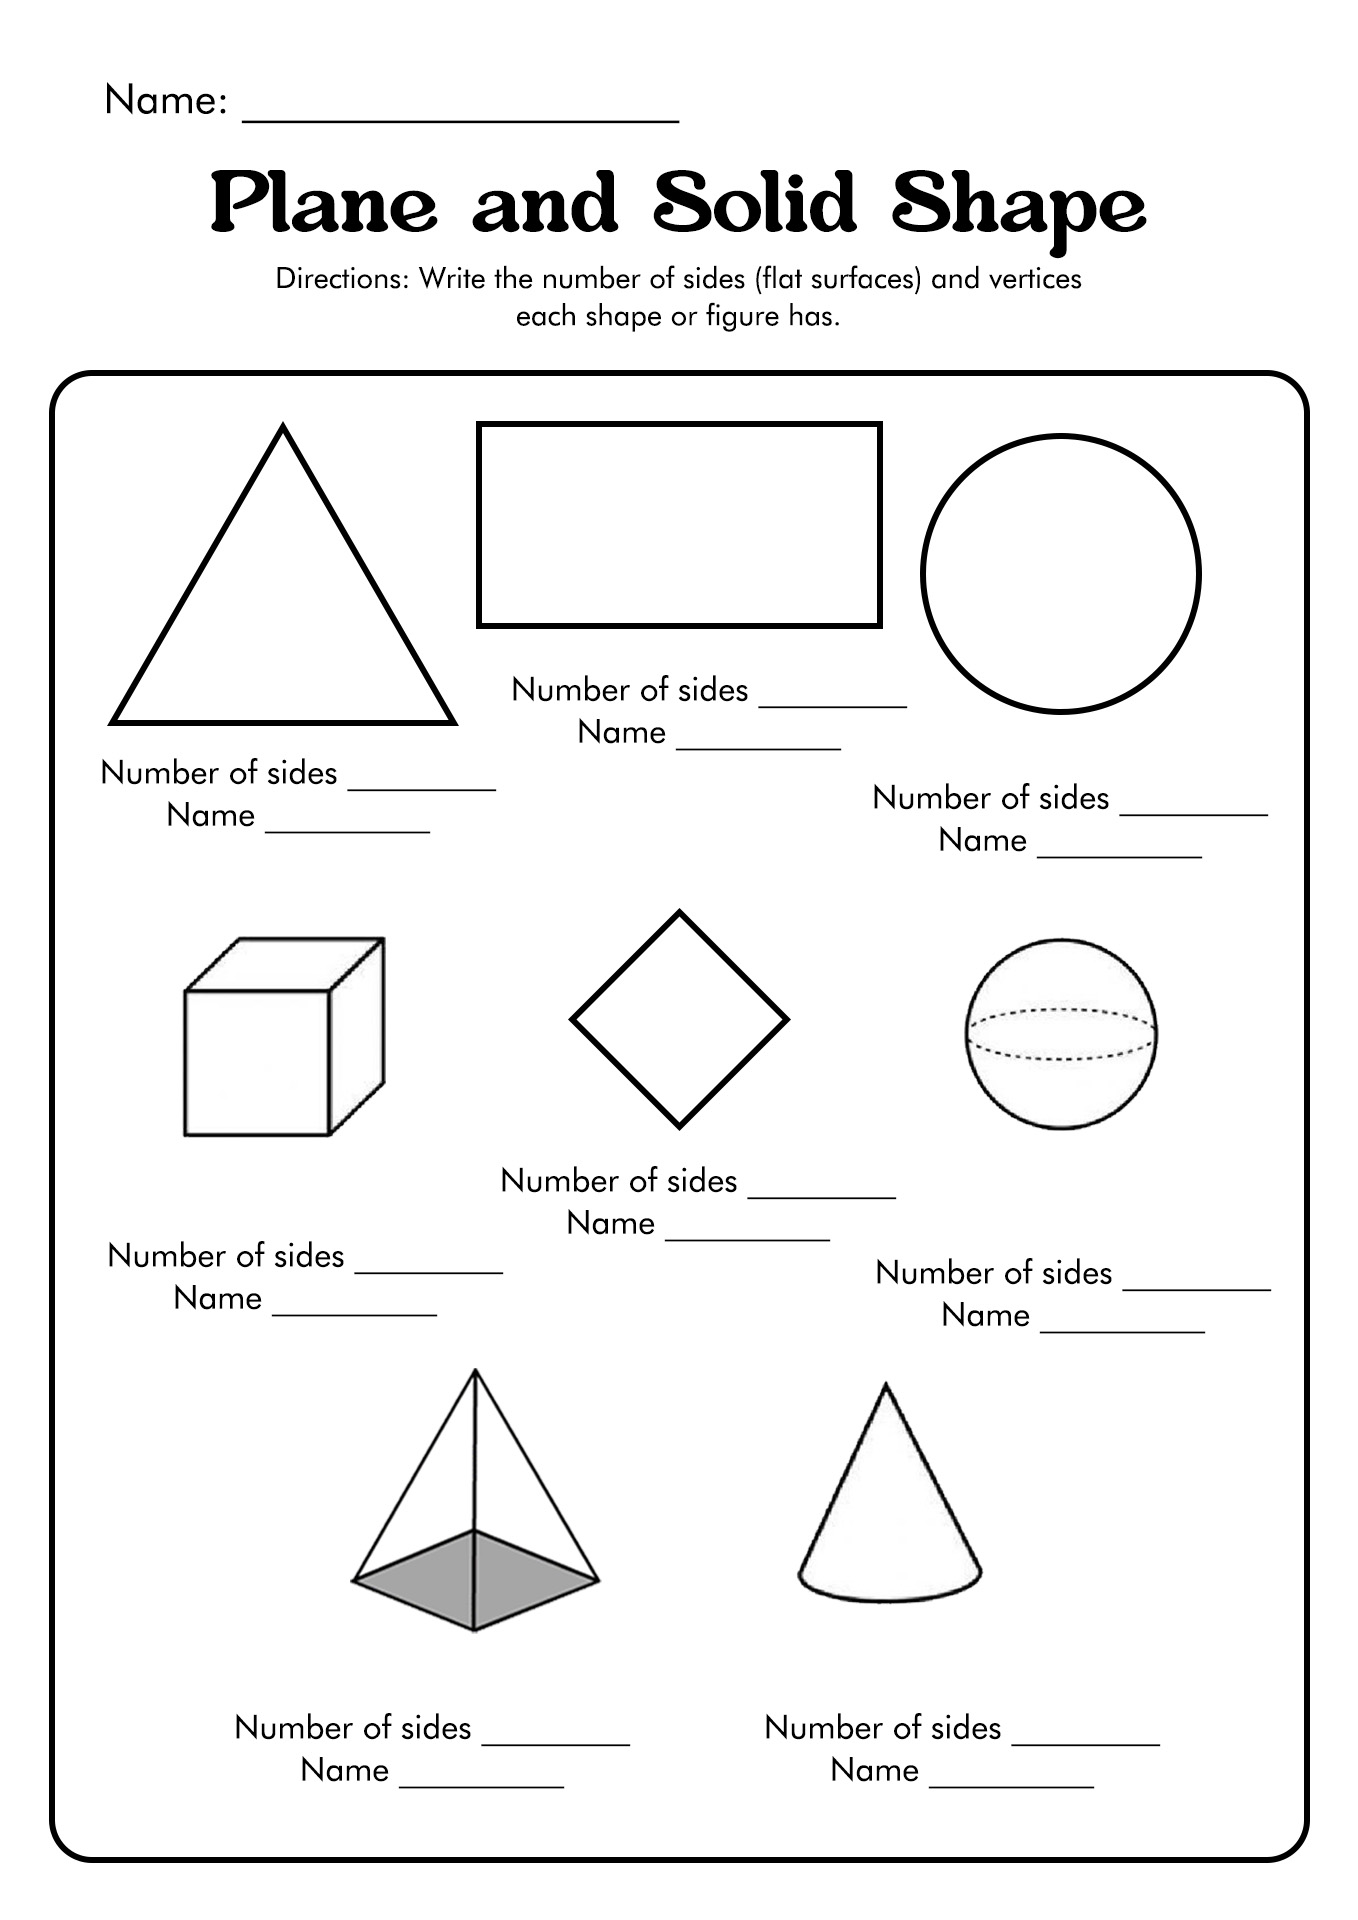 Plane and Solid Shape Activities Image